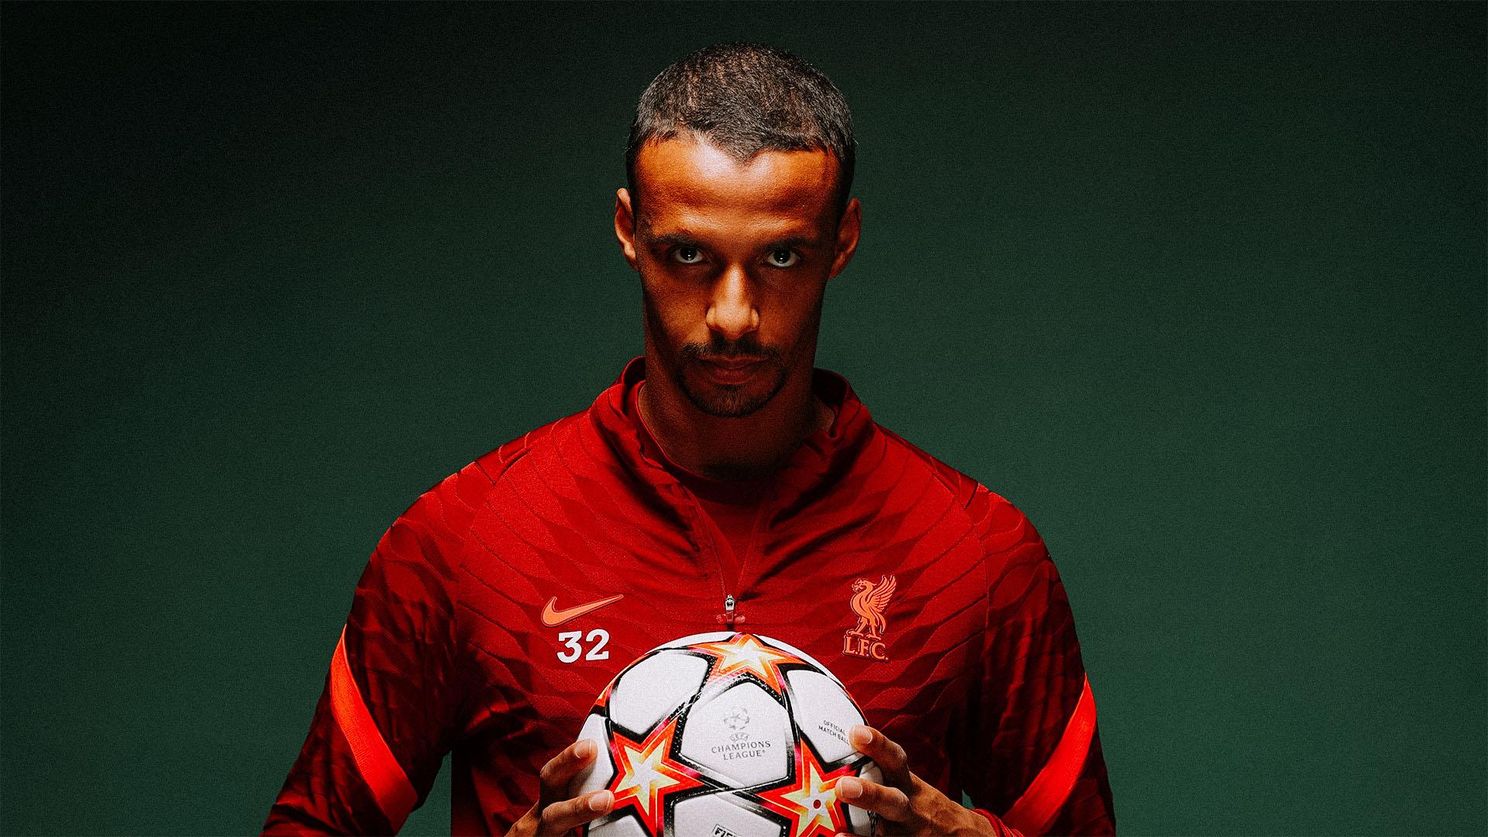 Joel Matip will not leave Liverpool during the January transfer window